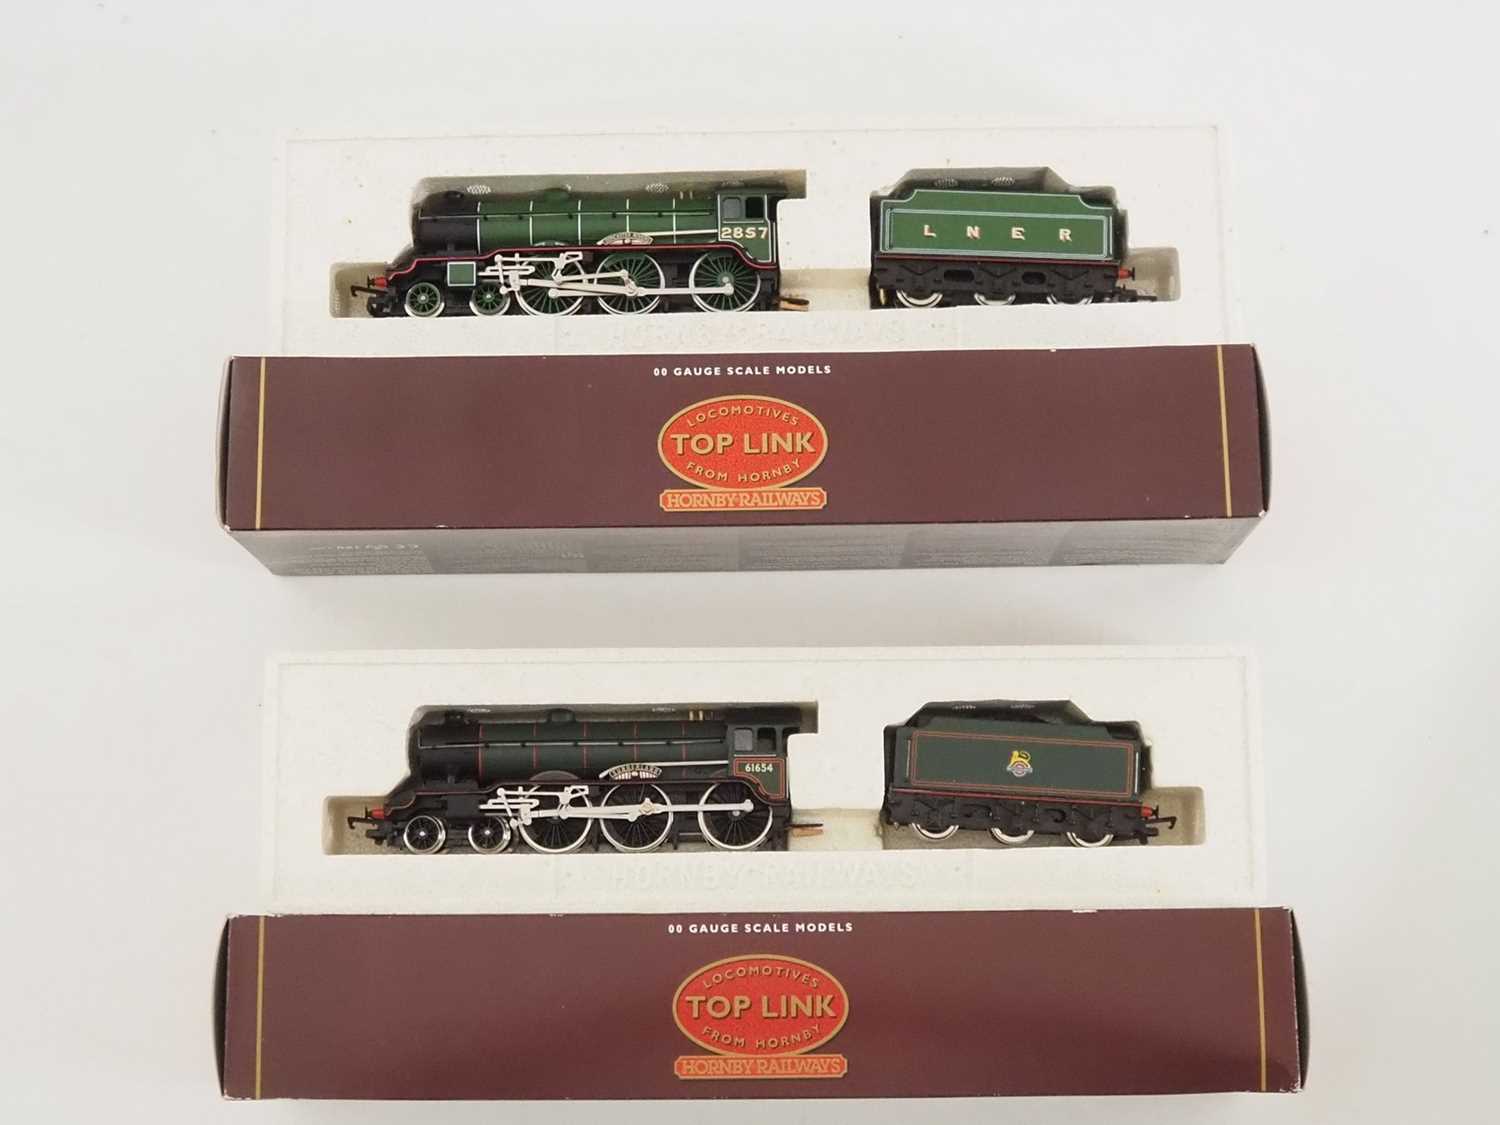 A pair of HORNBY OO gauge class B17/4 steam locomotives comprising 'Doncaster Rovers' in LNER